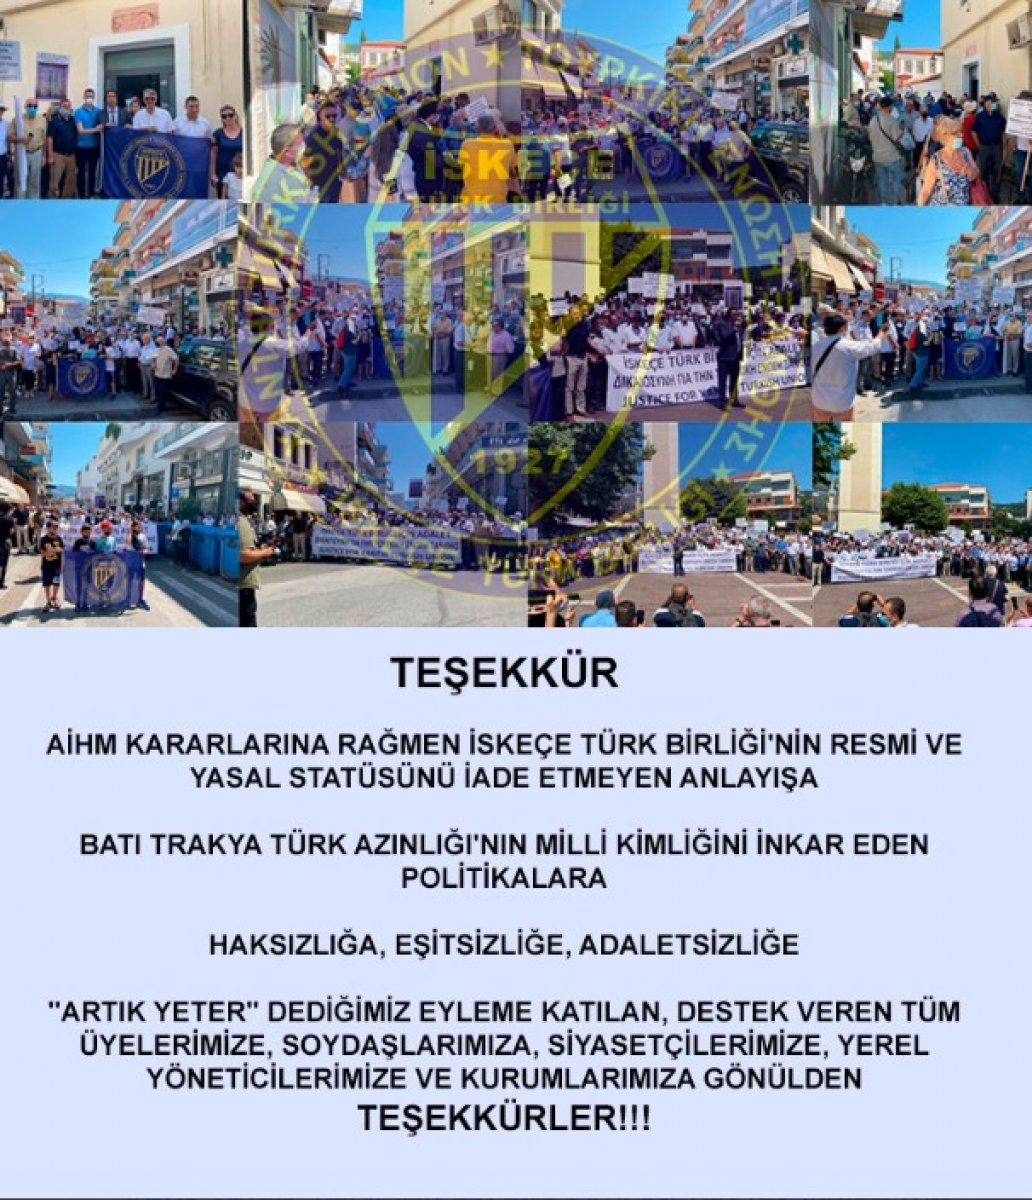 Call from the Ministry of Foreign Affairs to Greece to recognize the rights of the Turkish minority #1